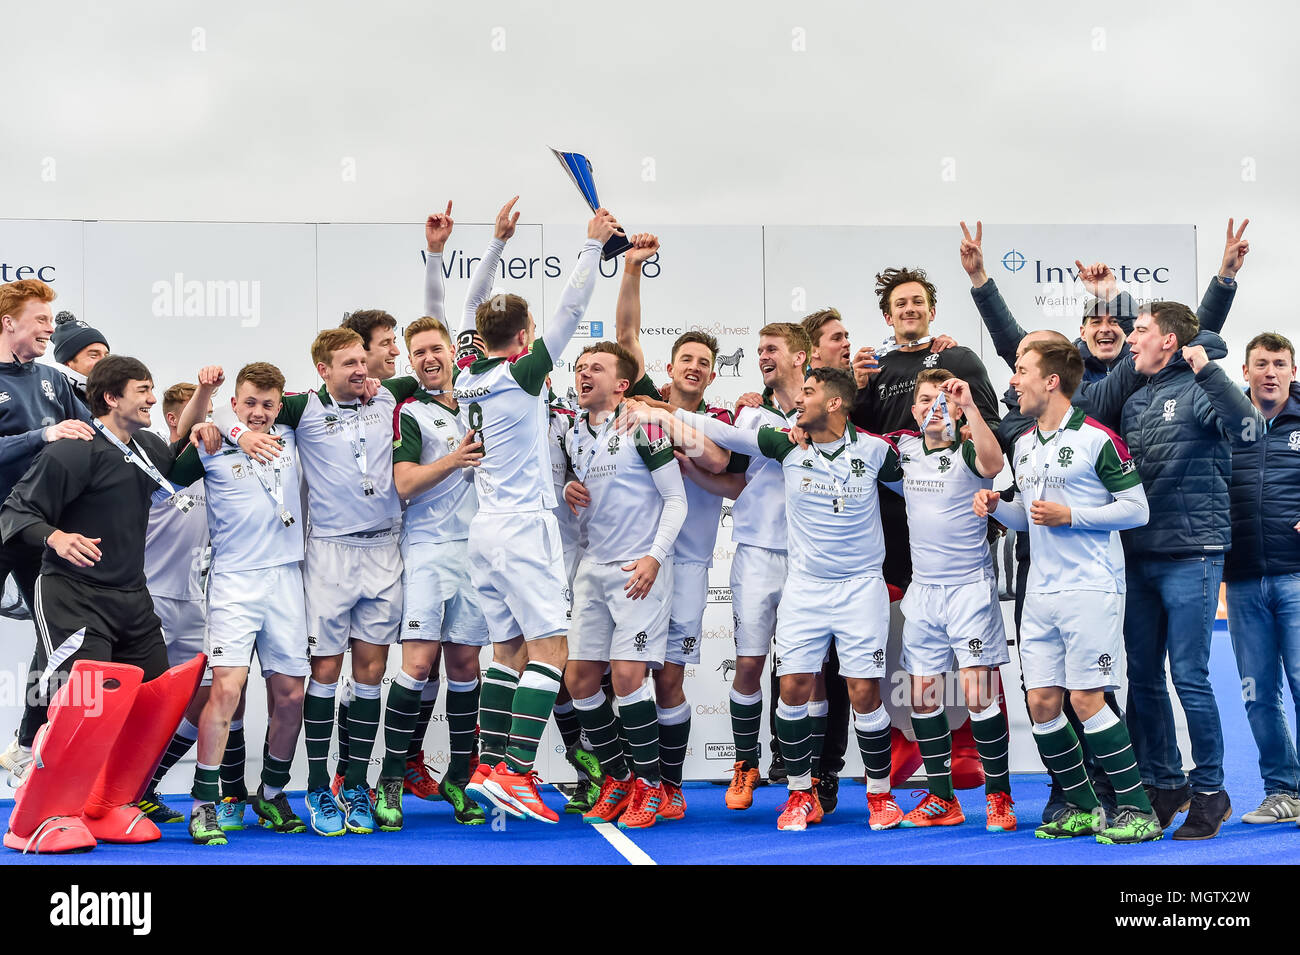 London, UK. 29 April 2018. Surbiton team celebrate after winning the England League during MHL Final between Hampstead & Westminster and Surbiton of the 2018 England Hockey League Final on Sunday, 29 April 2018. London, England. Credit: Taka G Wu Credit: Taka Wu/Alamy Live News Stock Photo